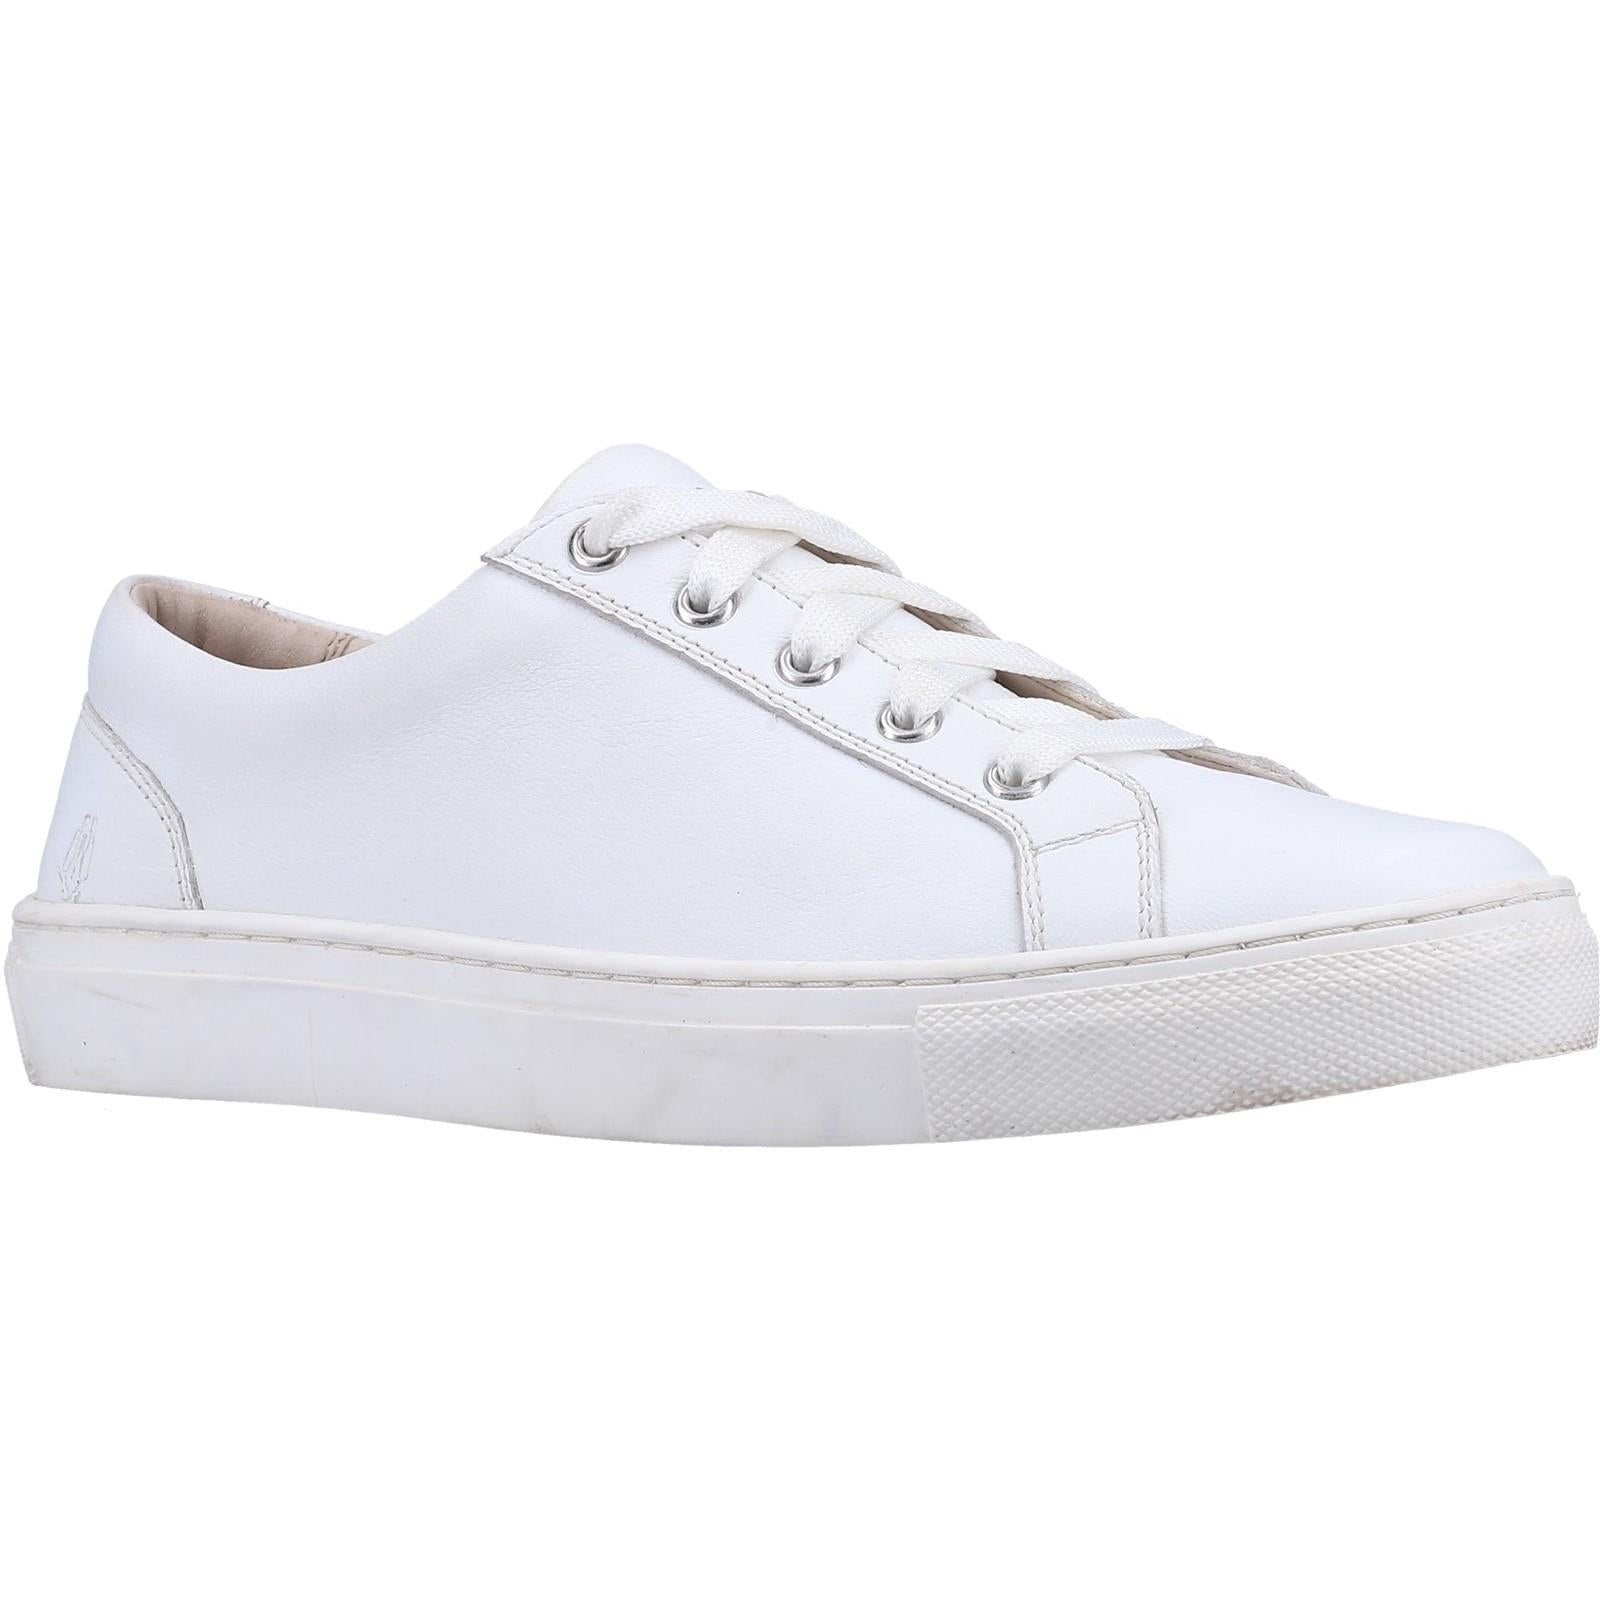 Hush Puppies Tessa white leather ladies lace up sneakers trainers shoes